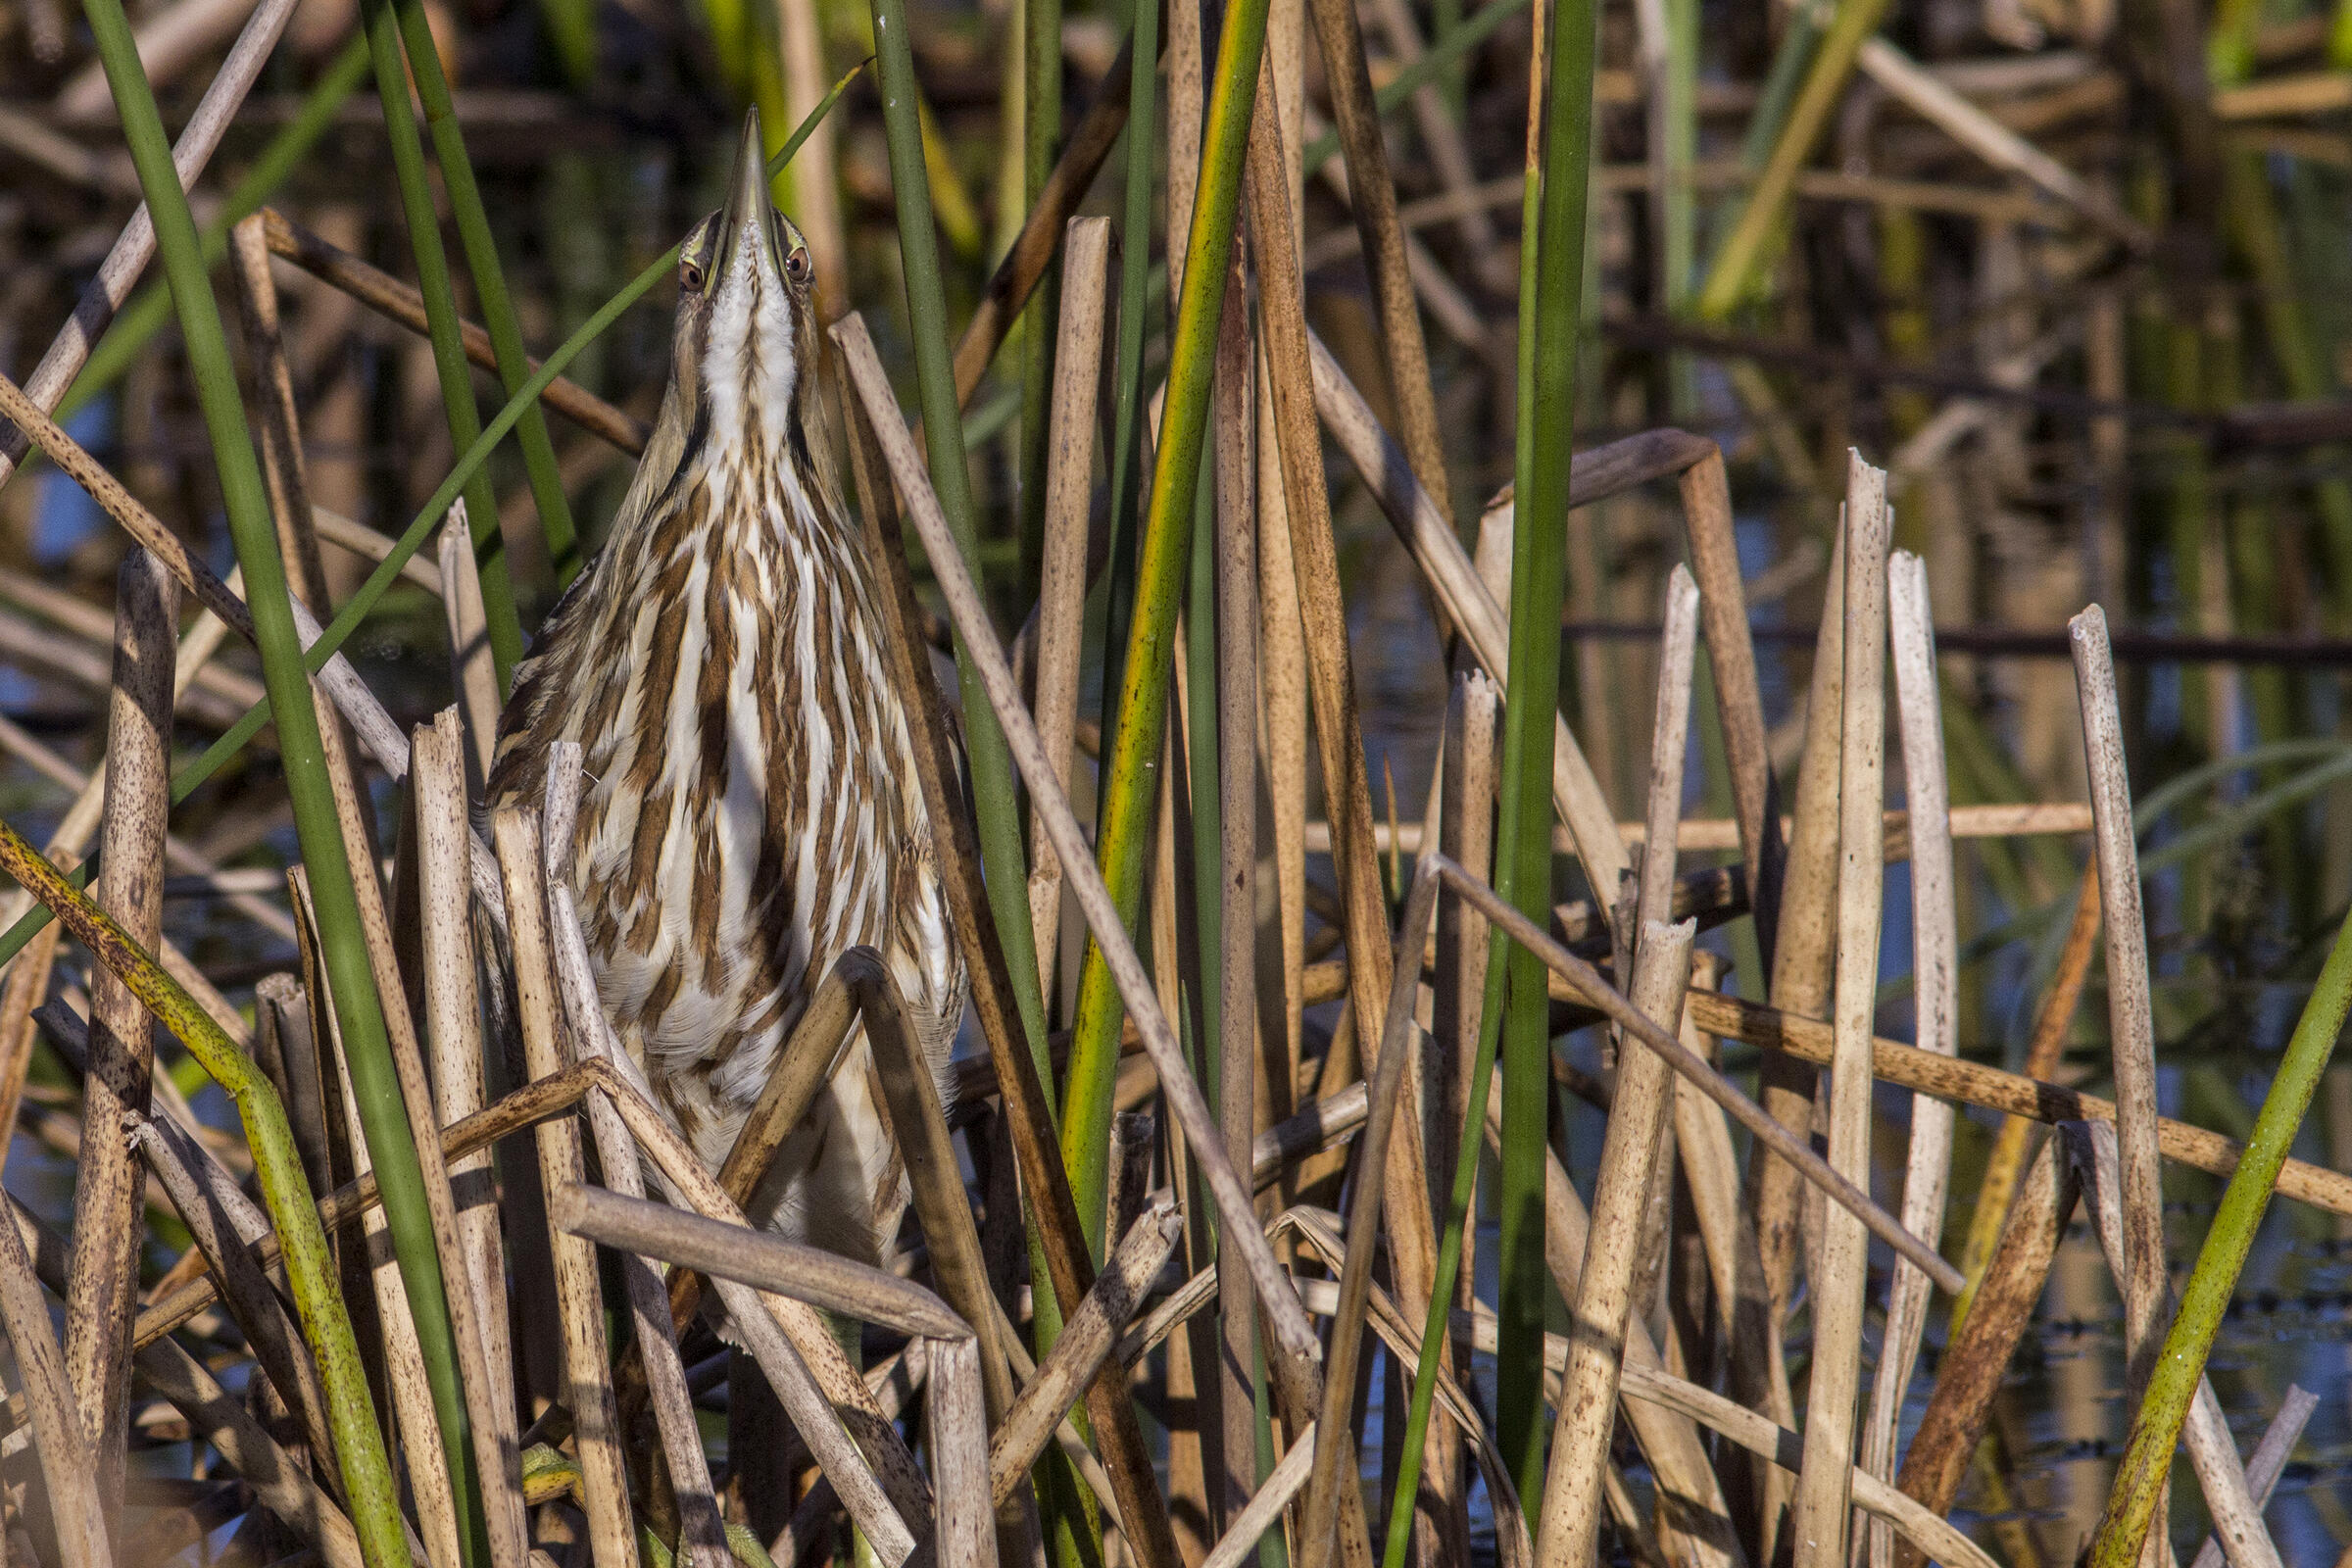 A brown and white wading bird standing in reeds